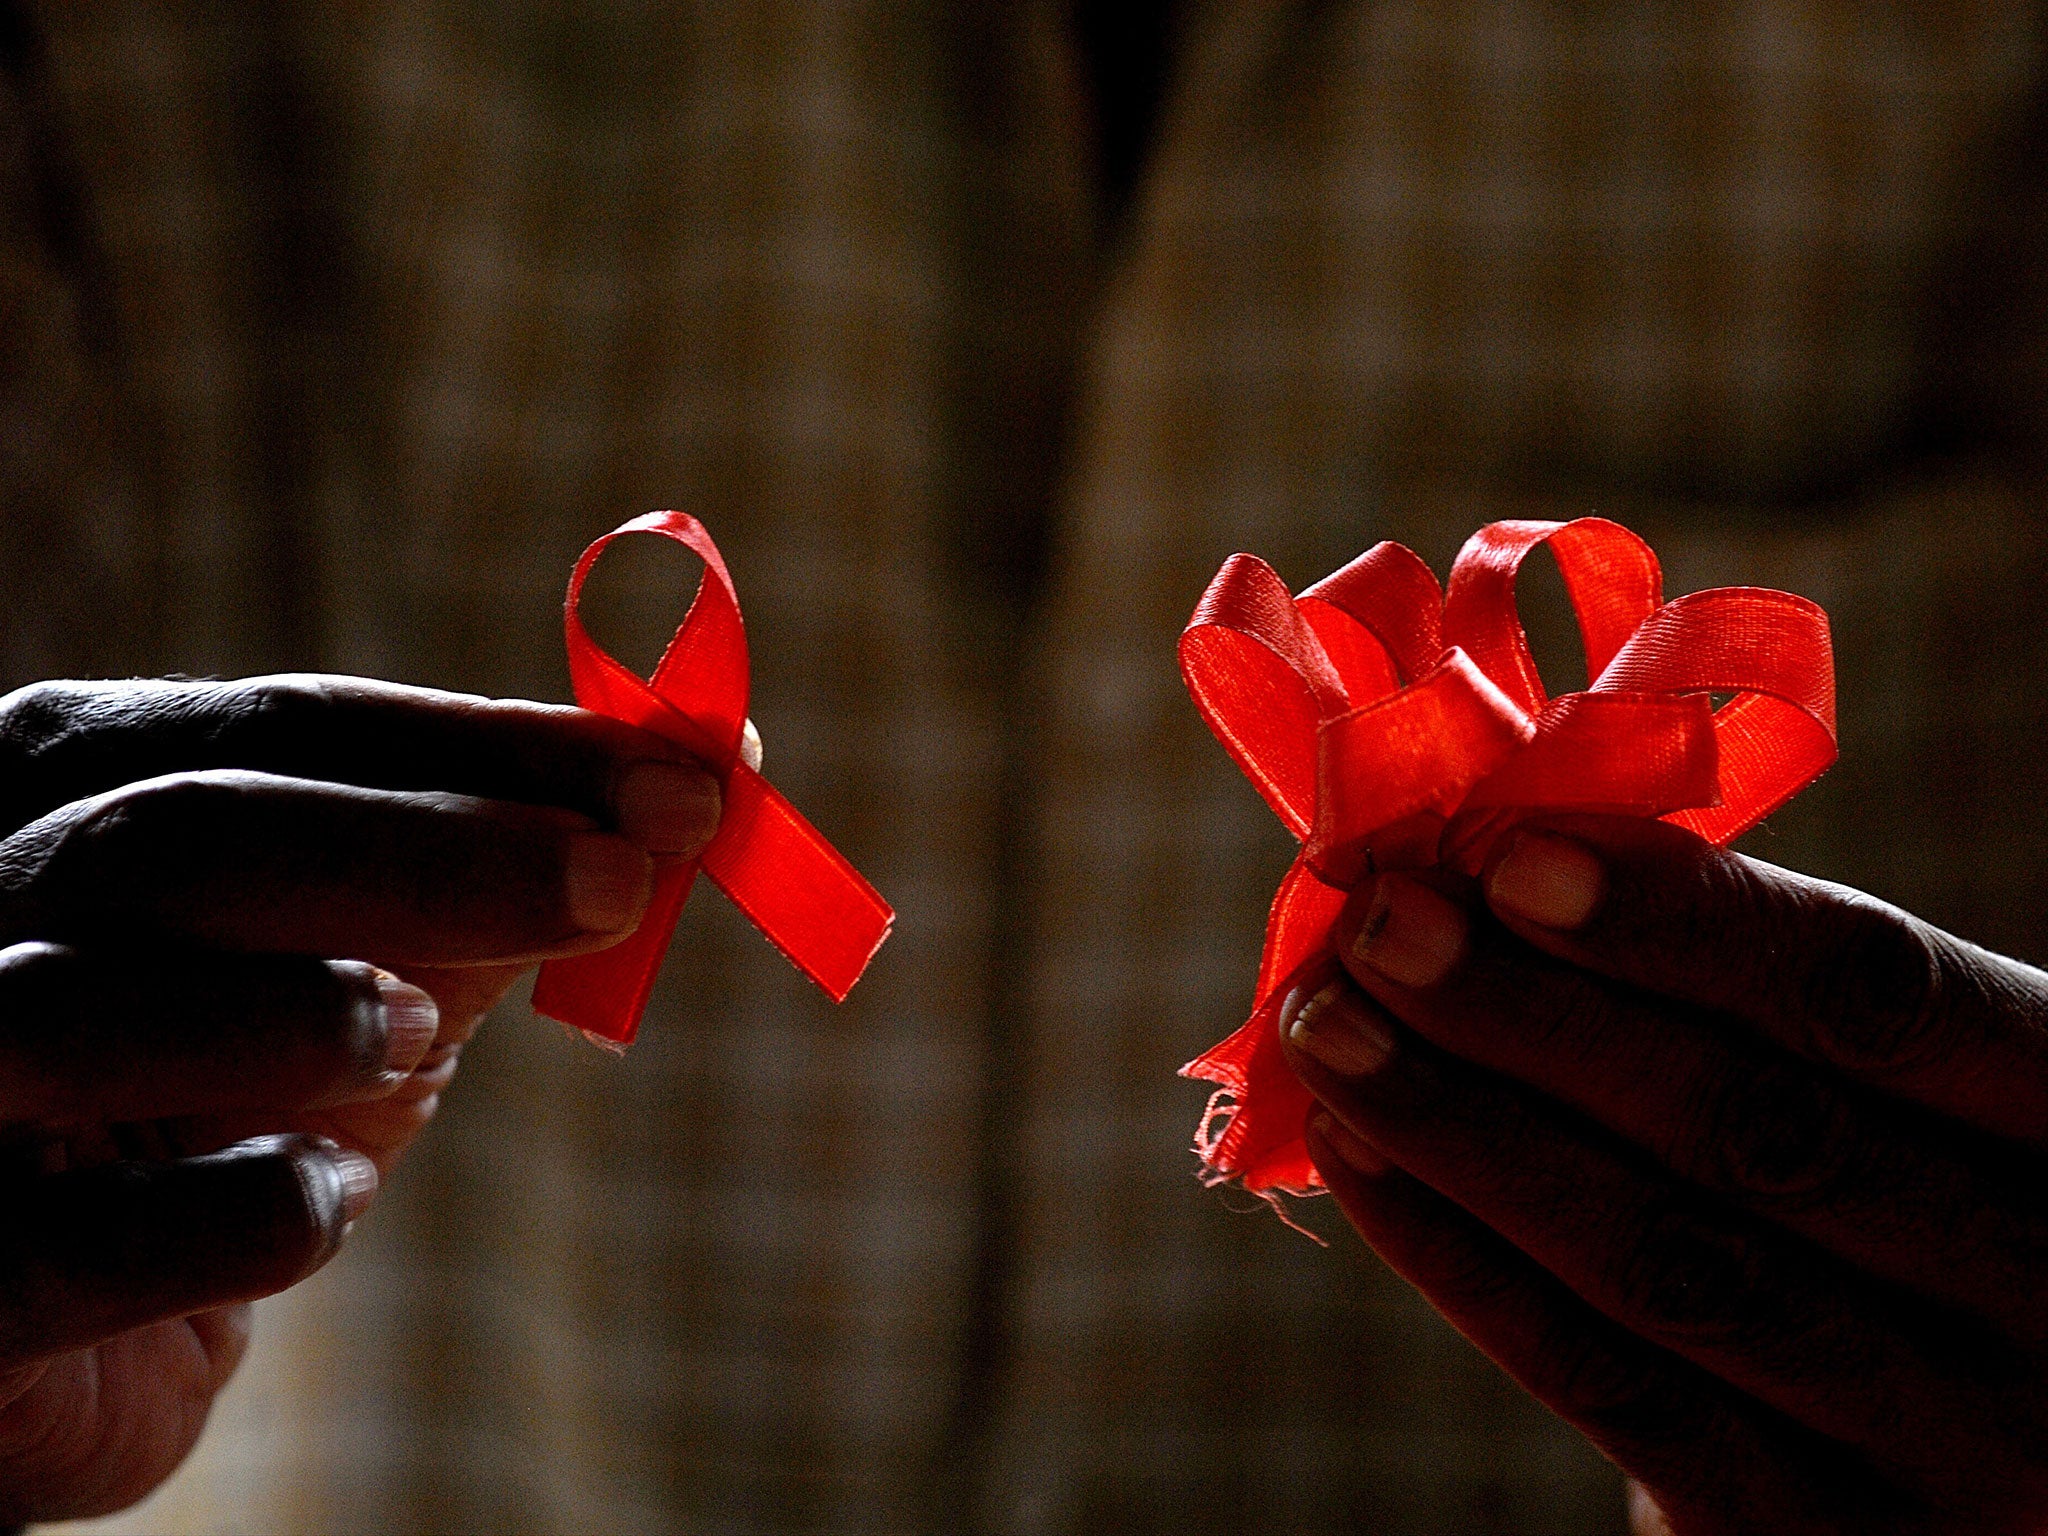 Health organisations estimate Russia will have 2 million HIV-positive cases by 2019